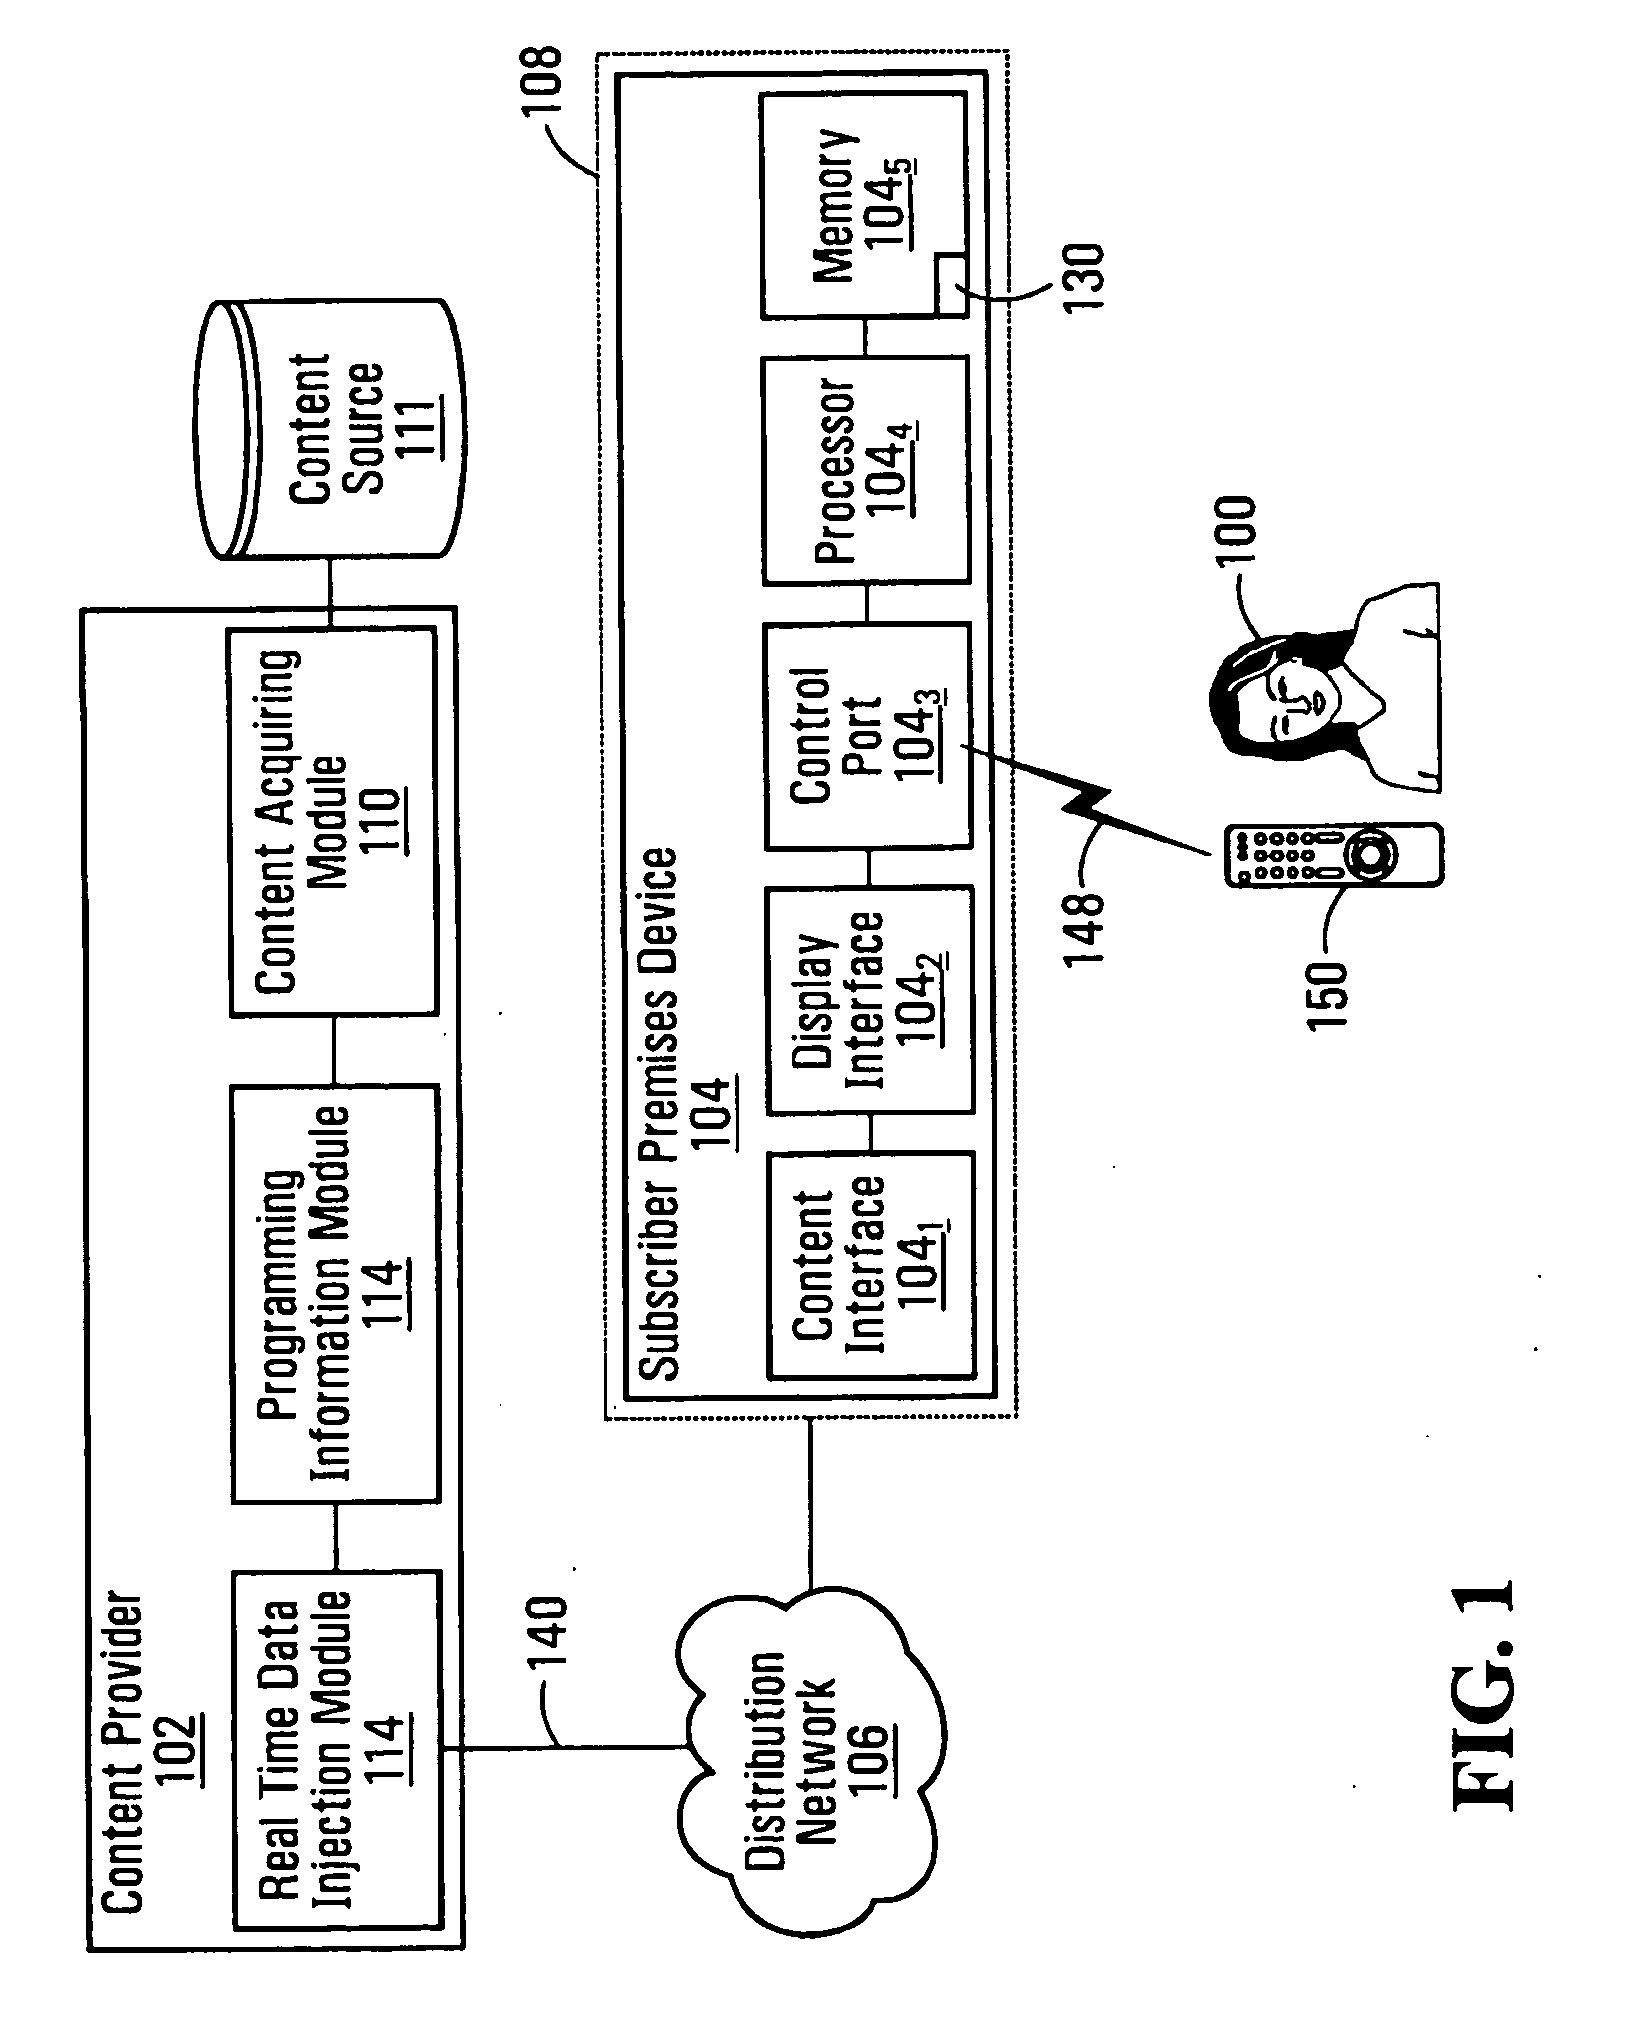 Method, system and apparatus for delivering enhanced programming information